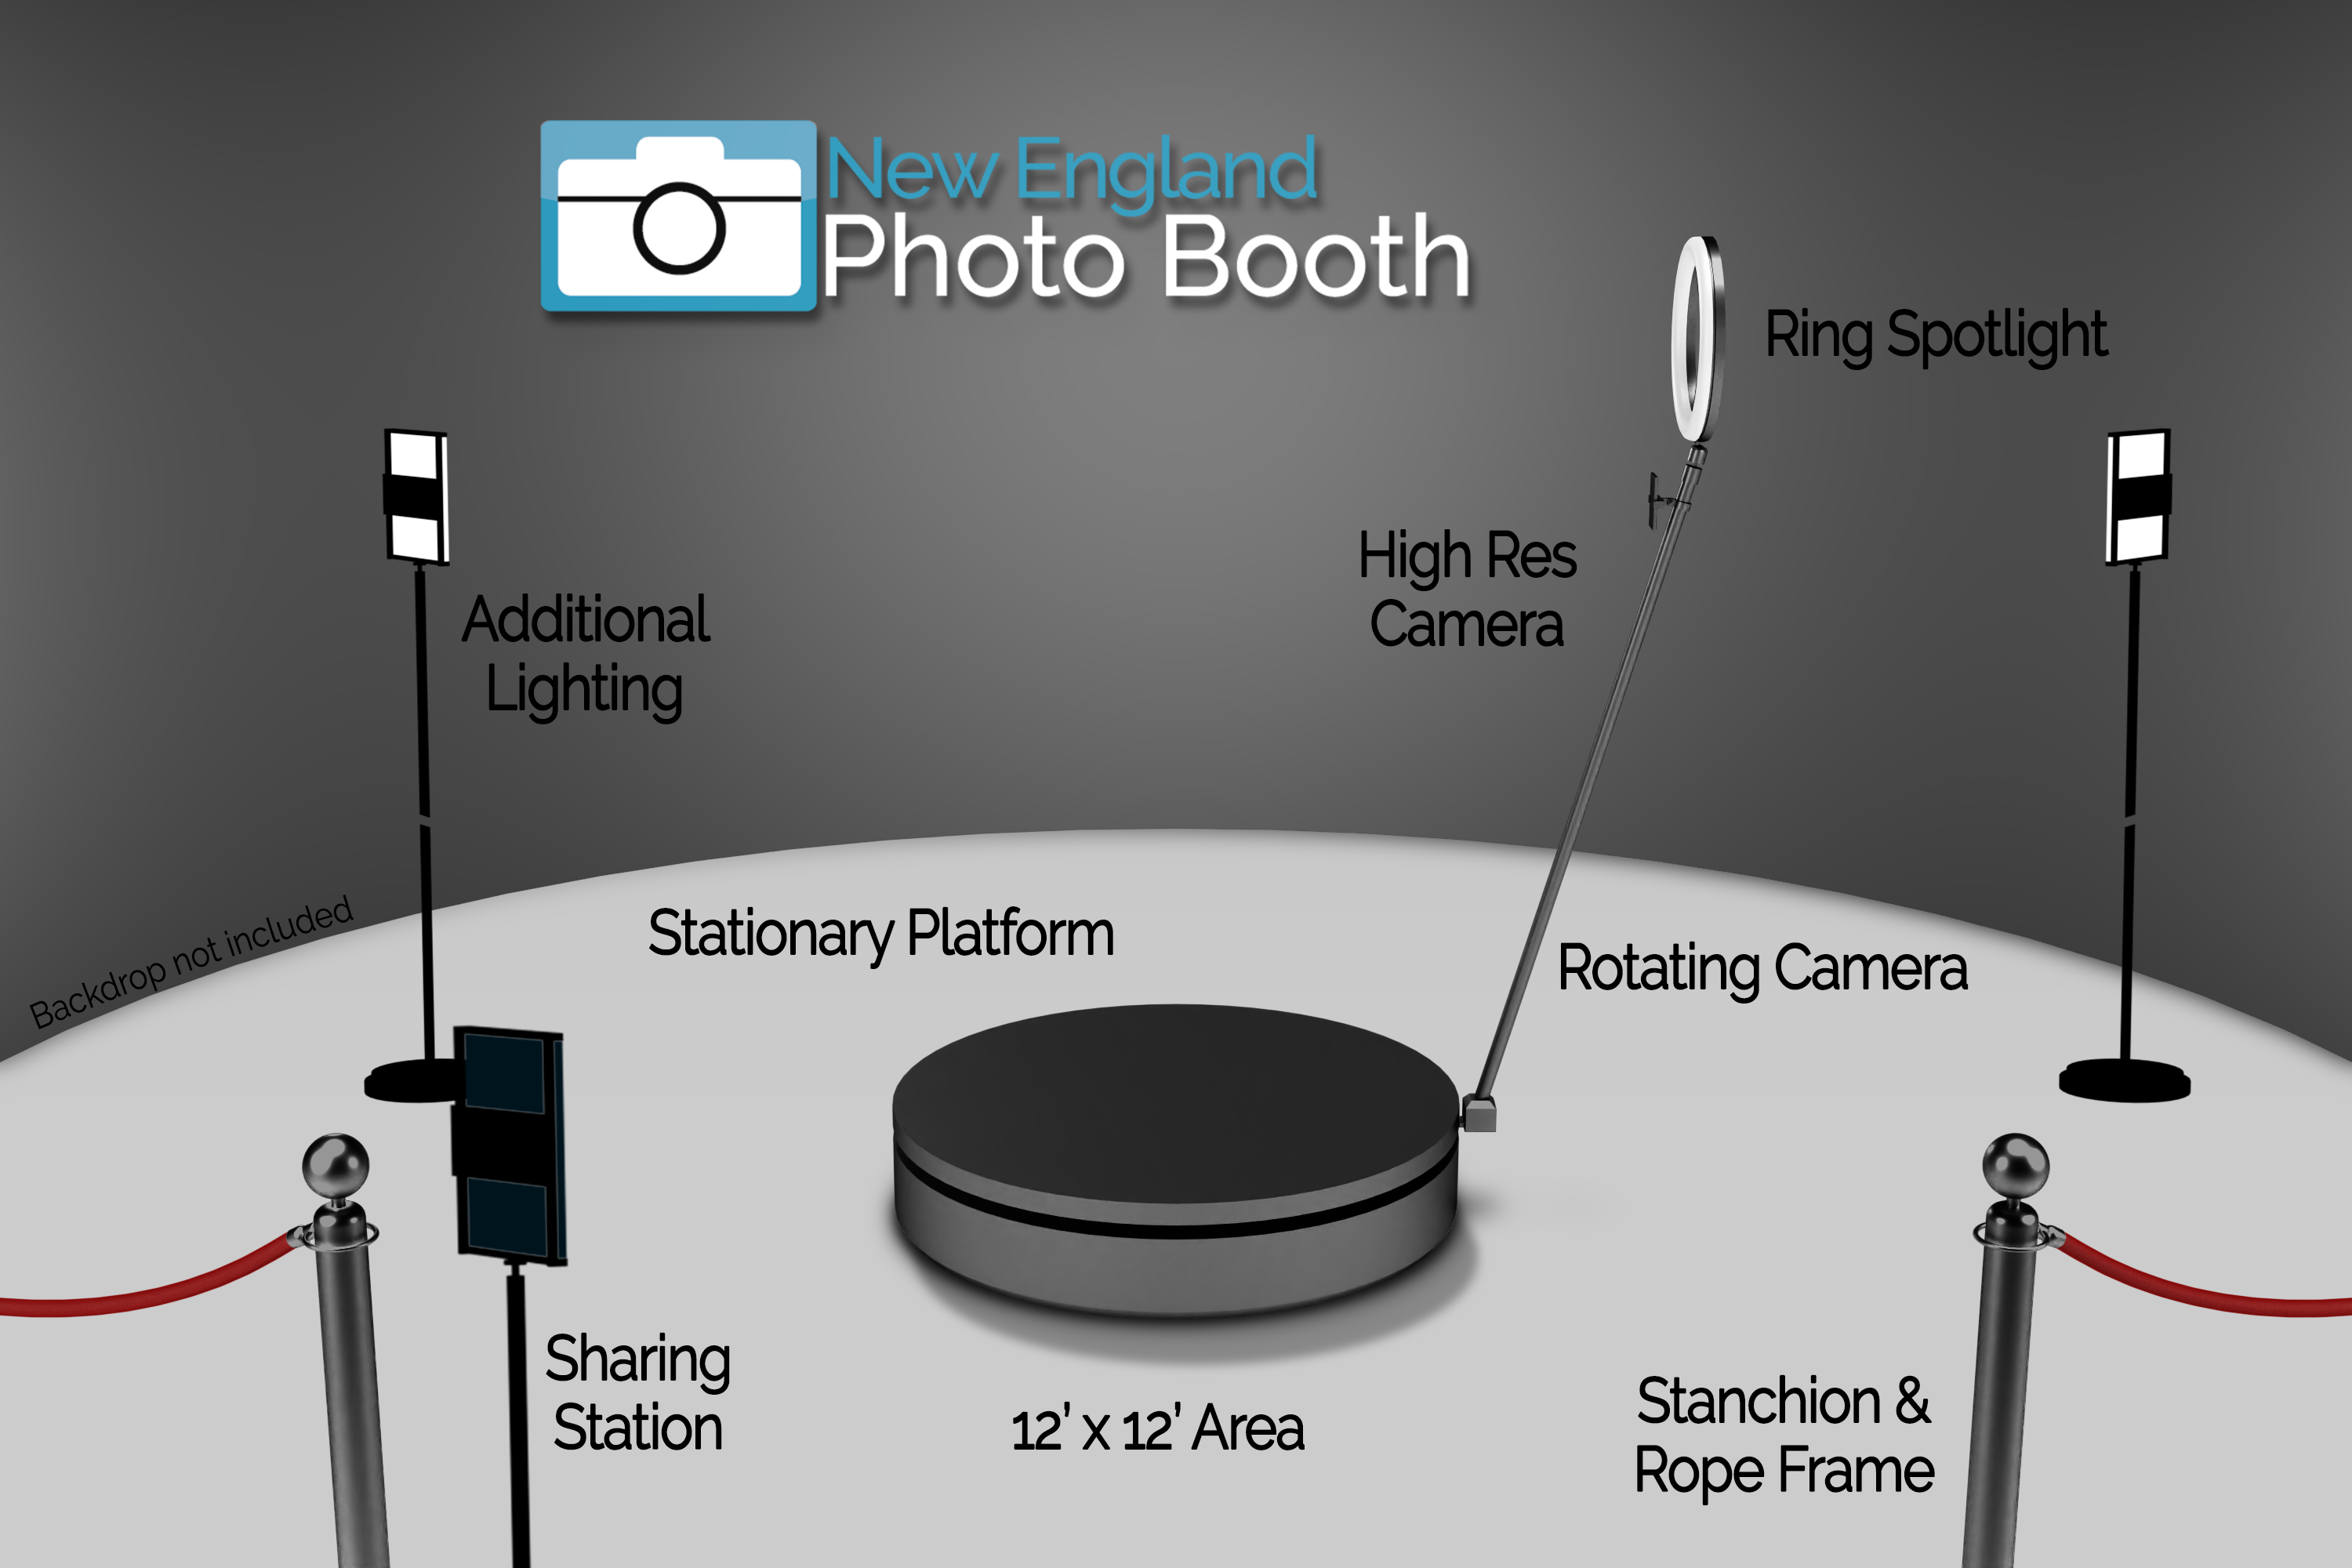 A detailed computer-generated image presenting a comprehensive overview of the 360-degree photo booth setup. This visual guide highlights all the essential components, including lighting fixtures, sturdy stanchion frames, and a user-friendly sharing station, providing a clear understanding of its advanced features and capabilities.